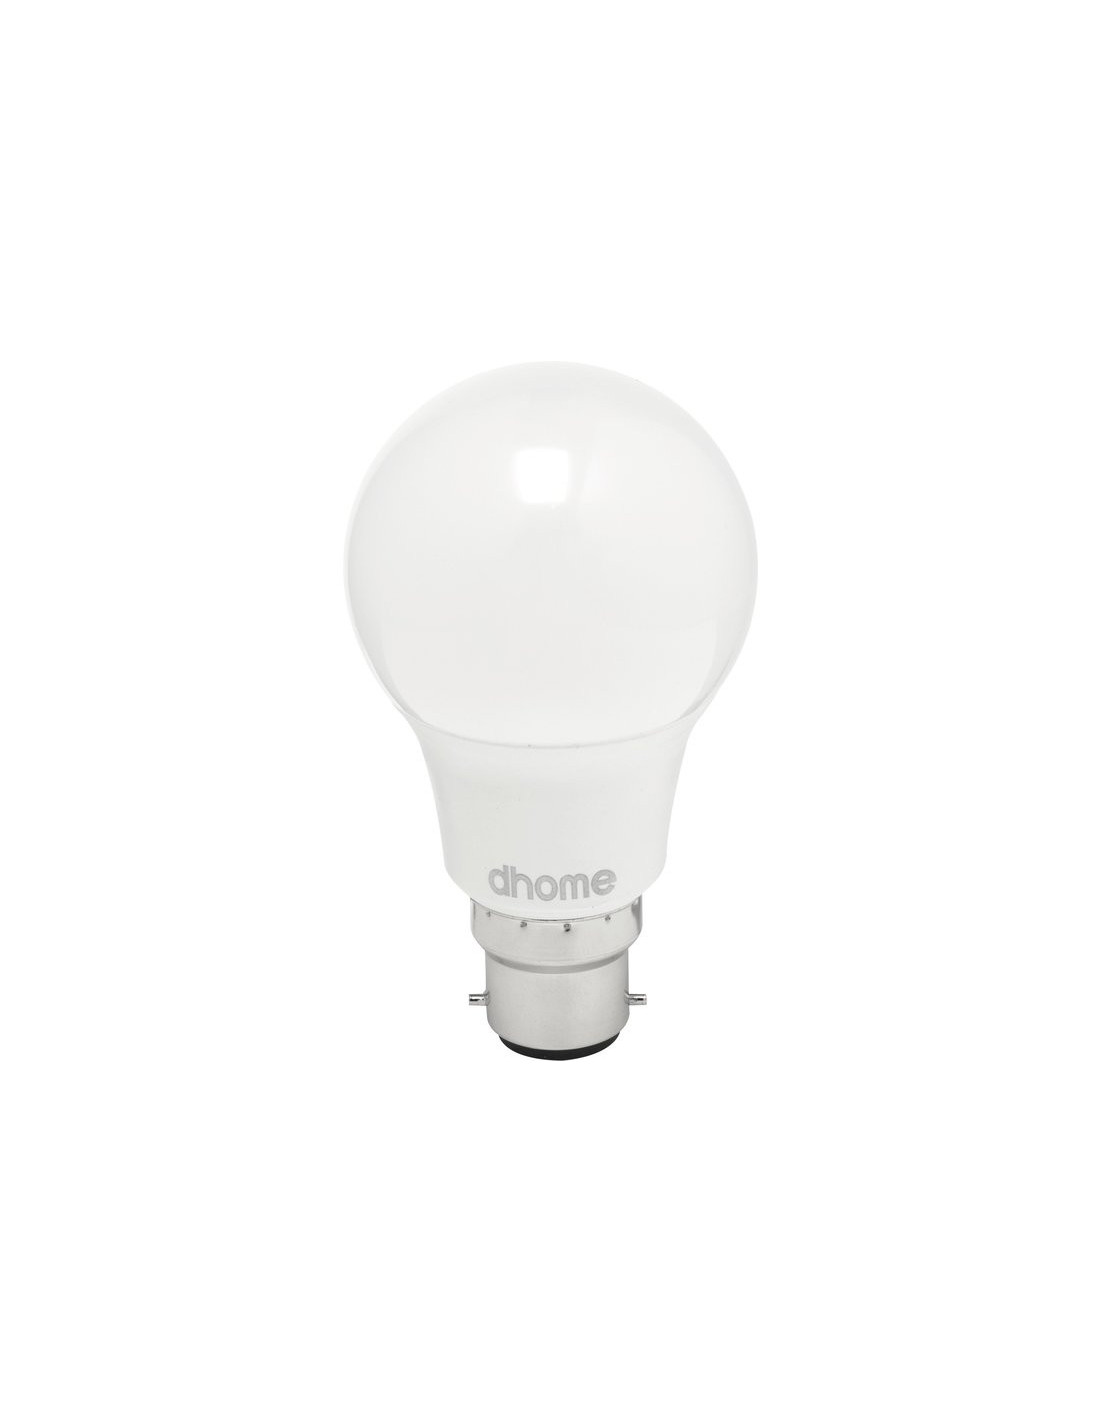 Ampoule led douille B22 4000k 806lm - 8 watts - DHOME - - 249225Dhome